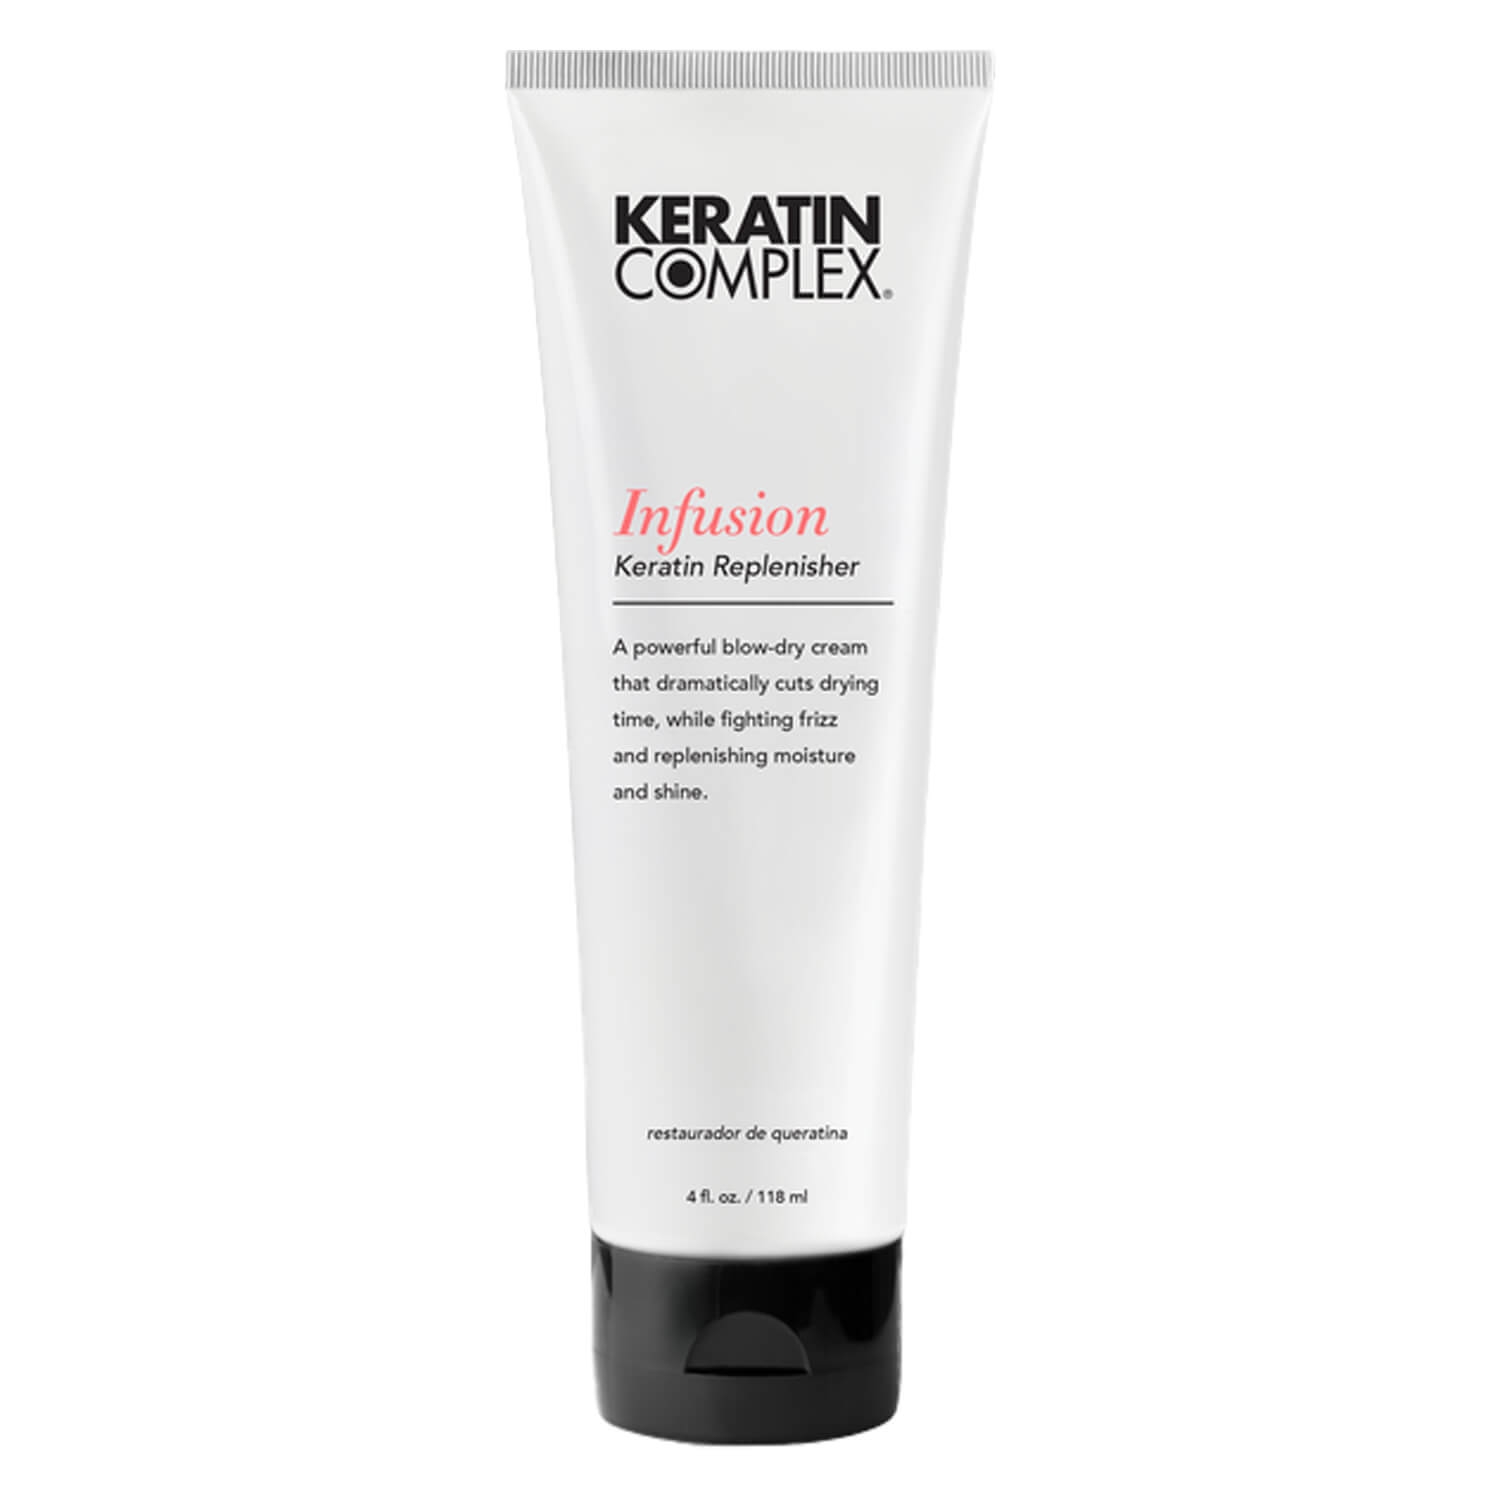 Product image from Keratin Complex - Infusion